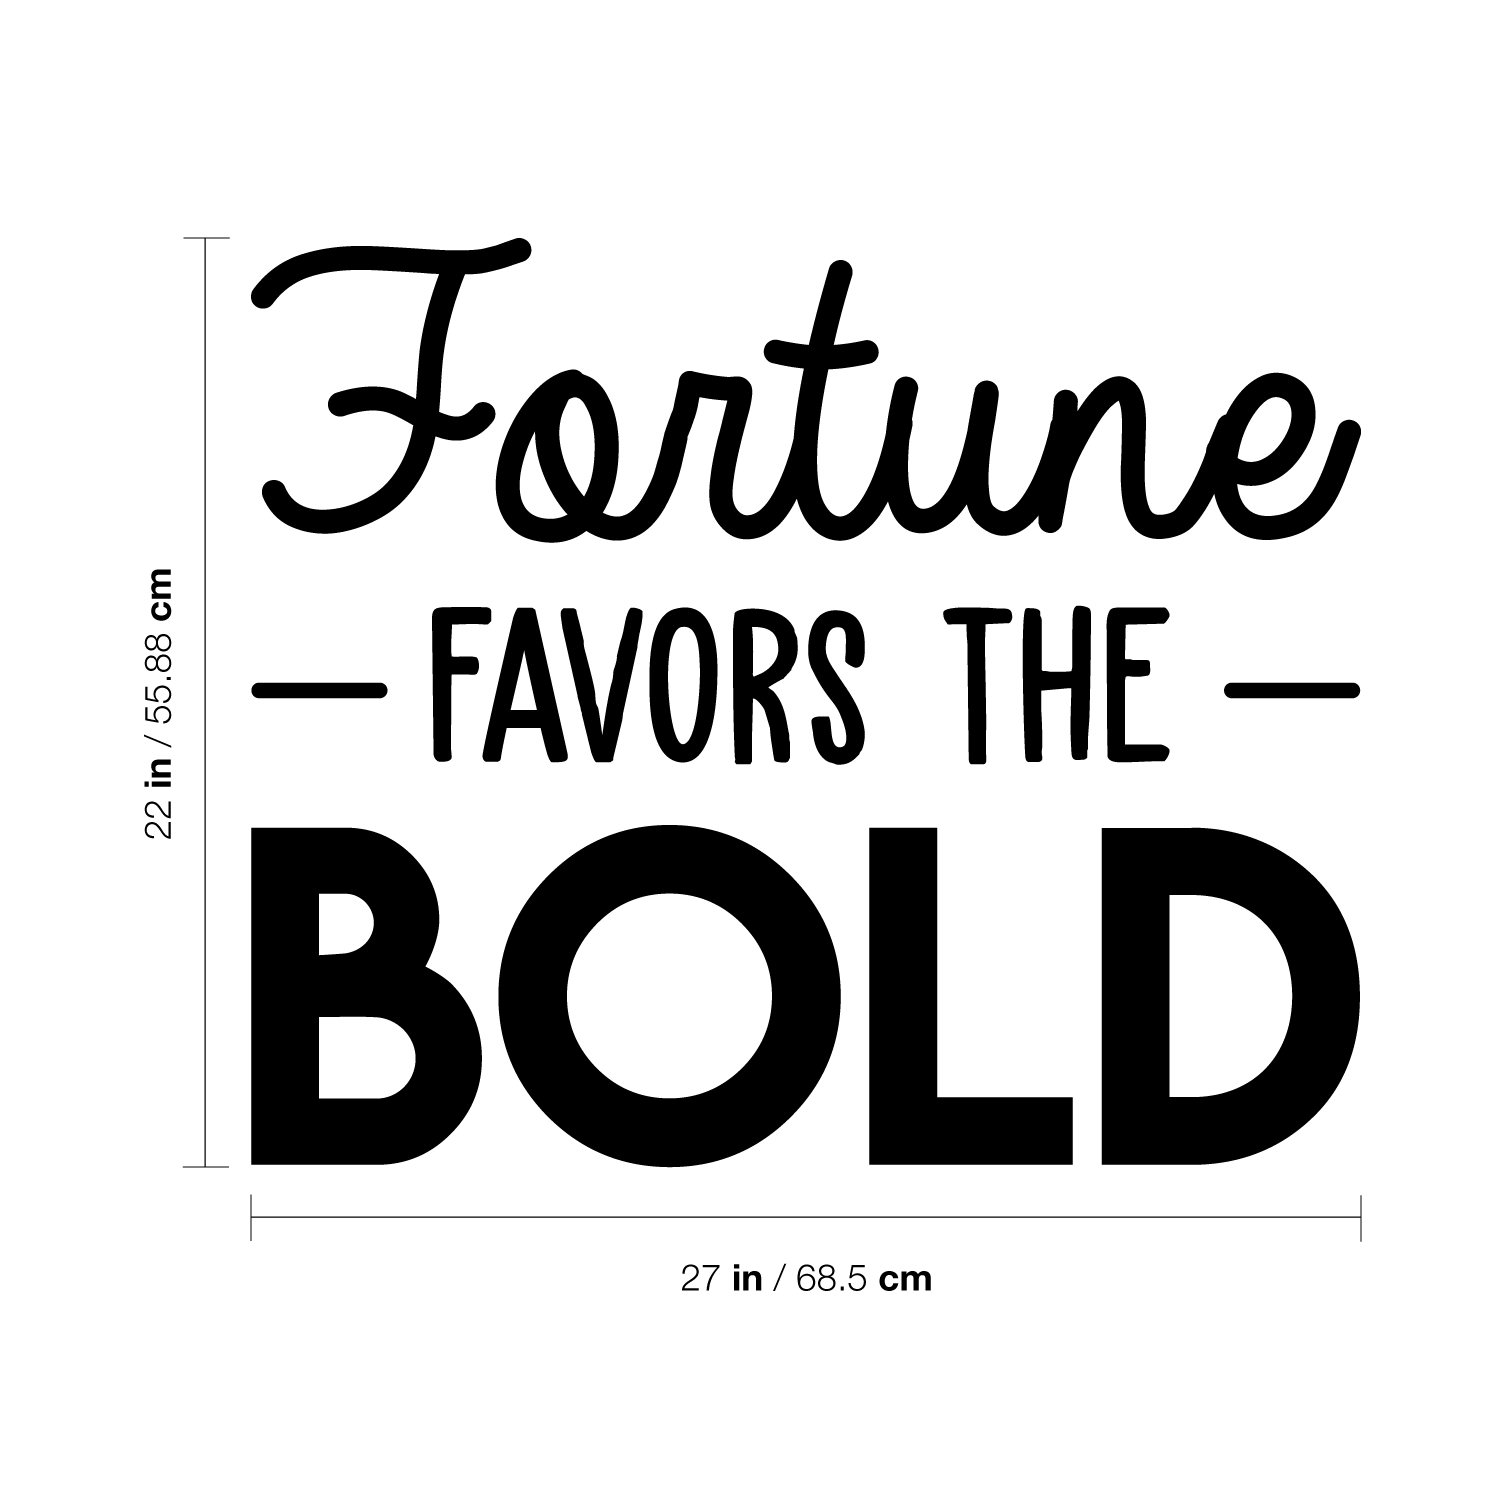 is the saying fortune favors the brave or the bold